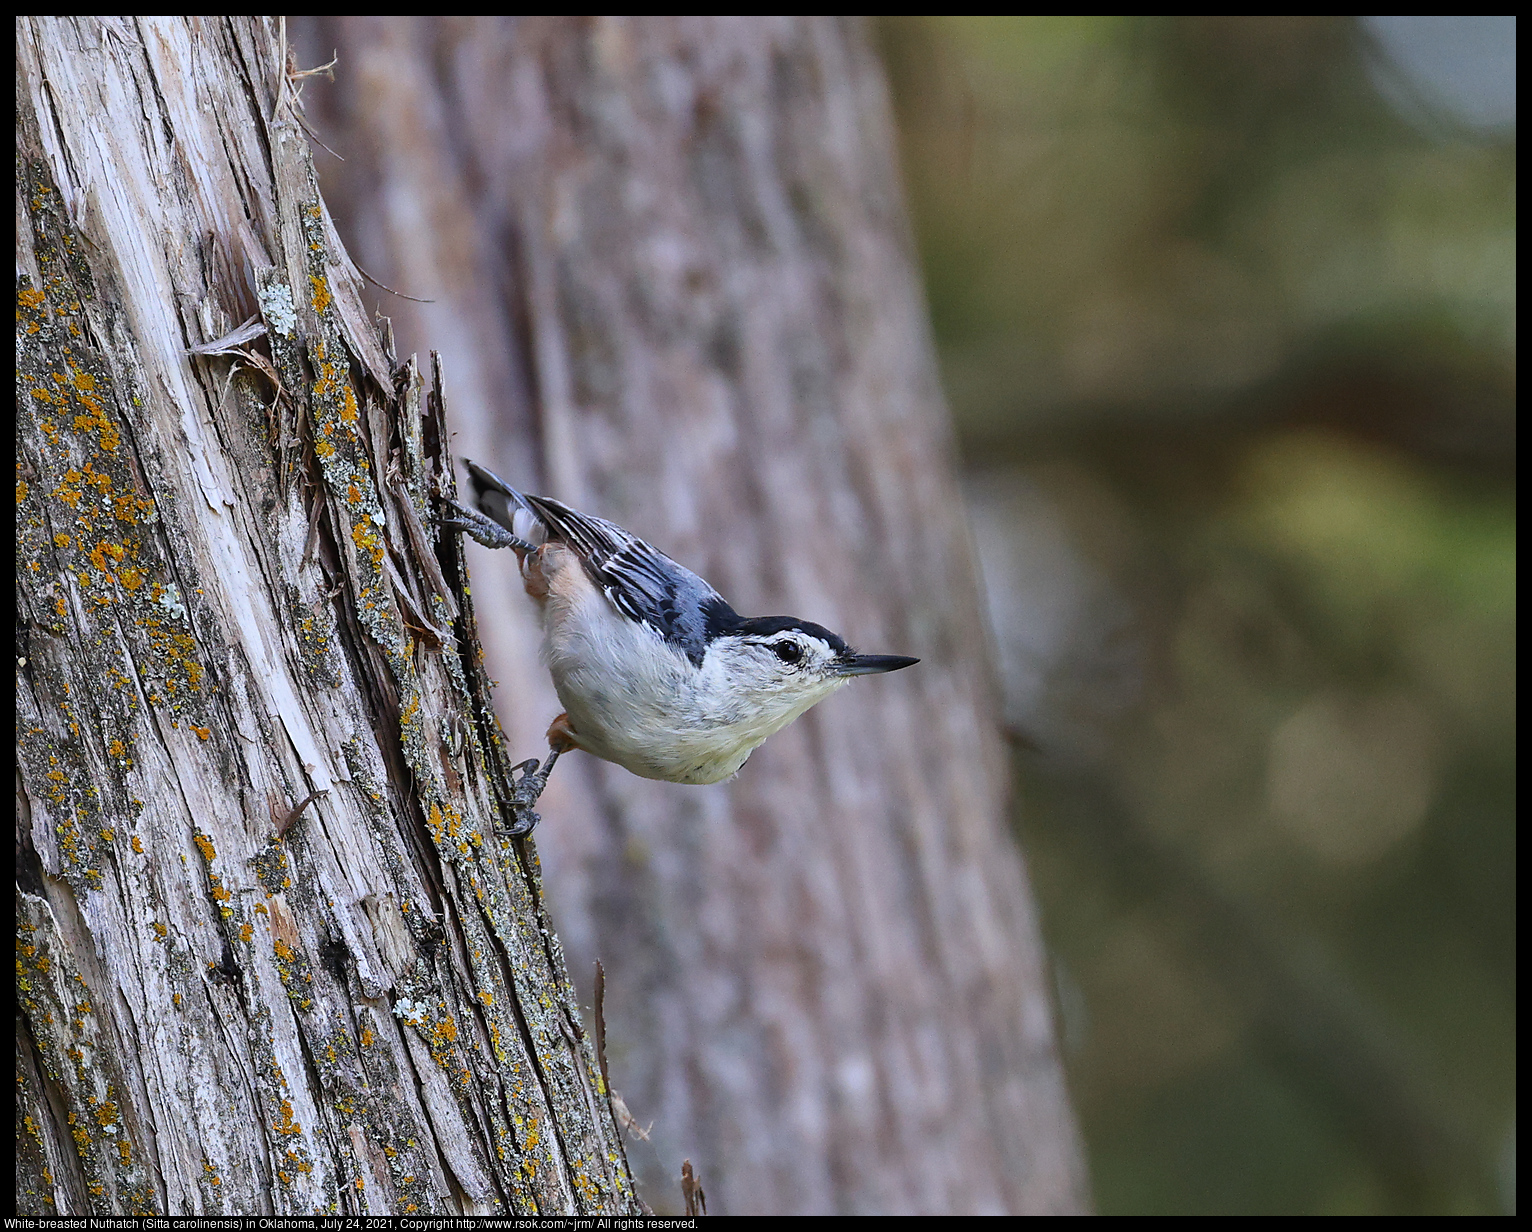 White-breasted Nuthatch (Sitta carolinensis) in Oklahoma, July 24, 2021